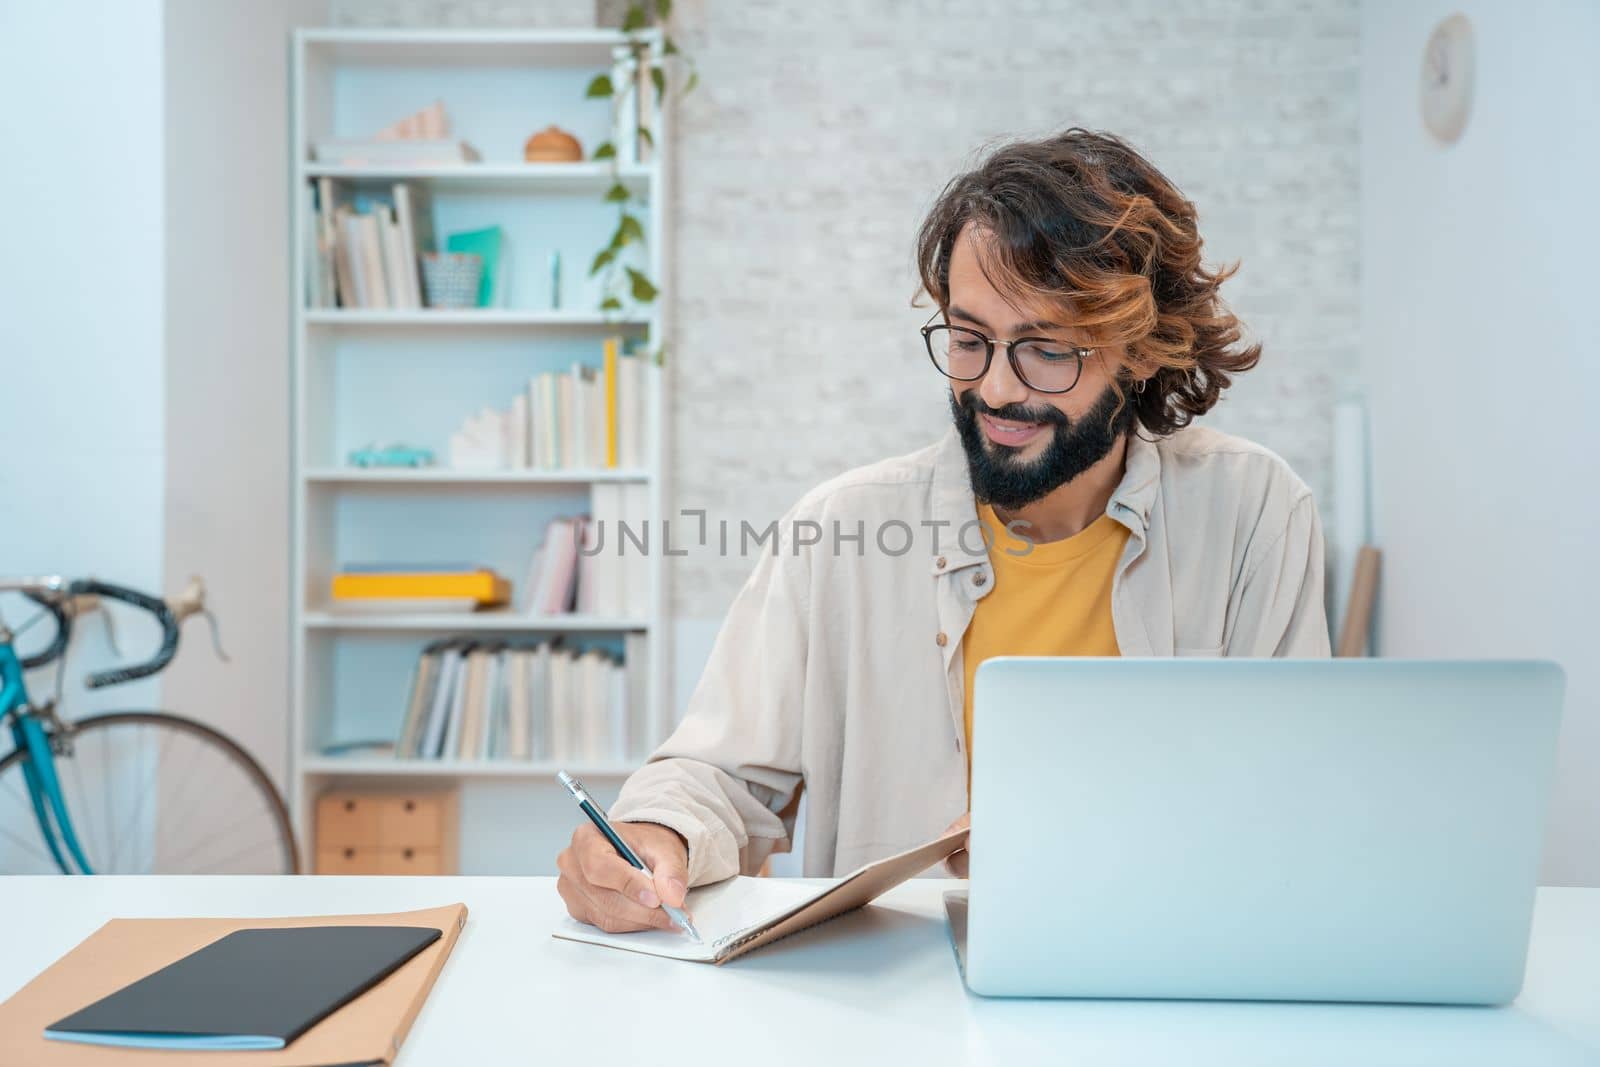 Man using laptop at home remote work in a small business. Handsome smiling male freelancer entrepreneur working in a creative project with research. High quality 4k footage